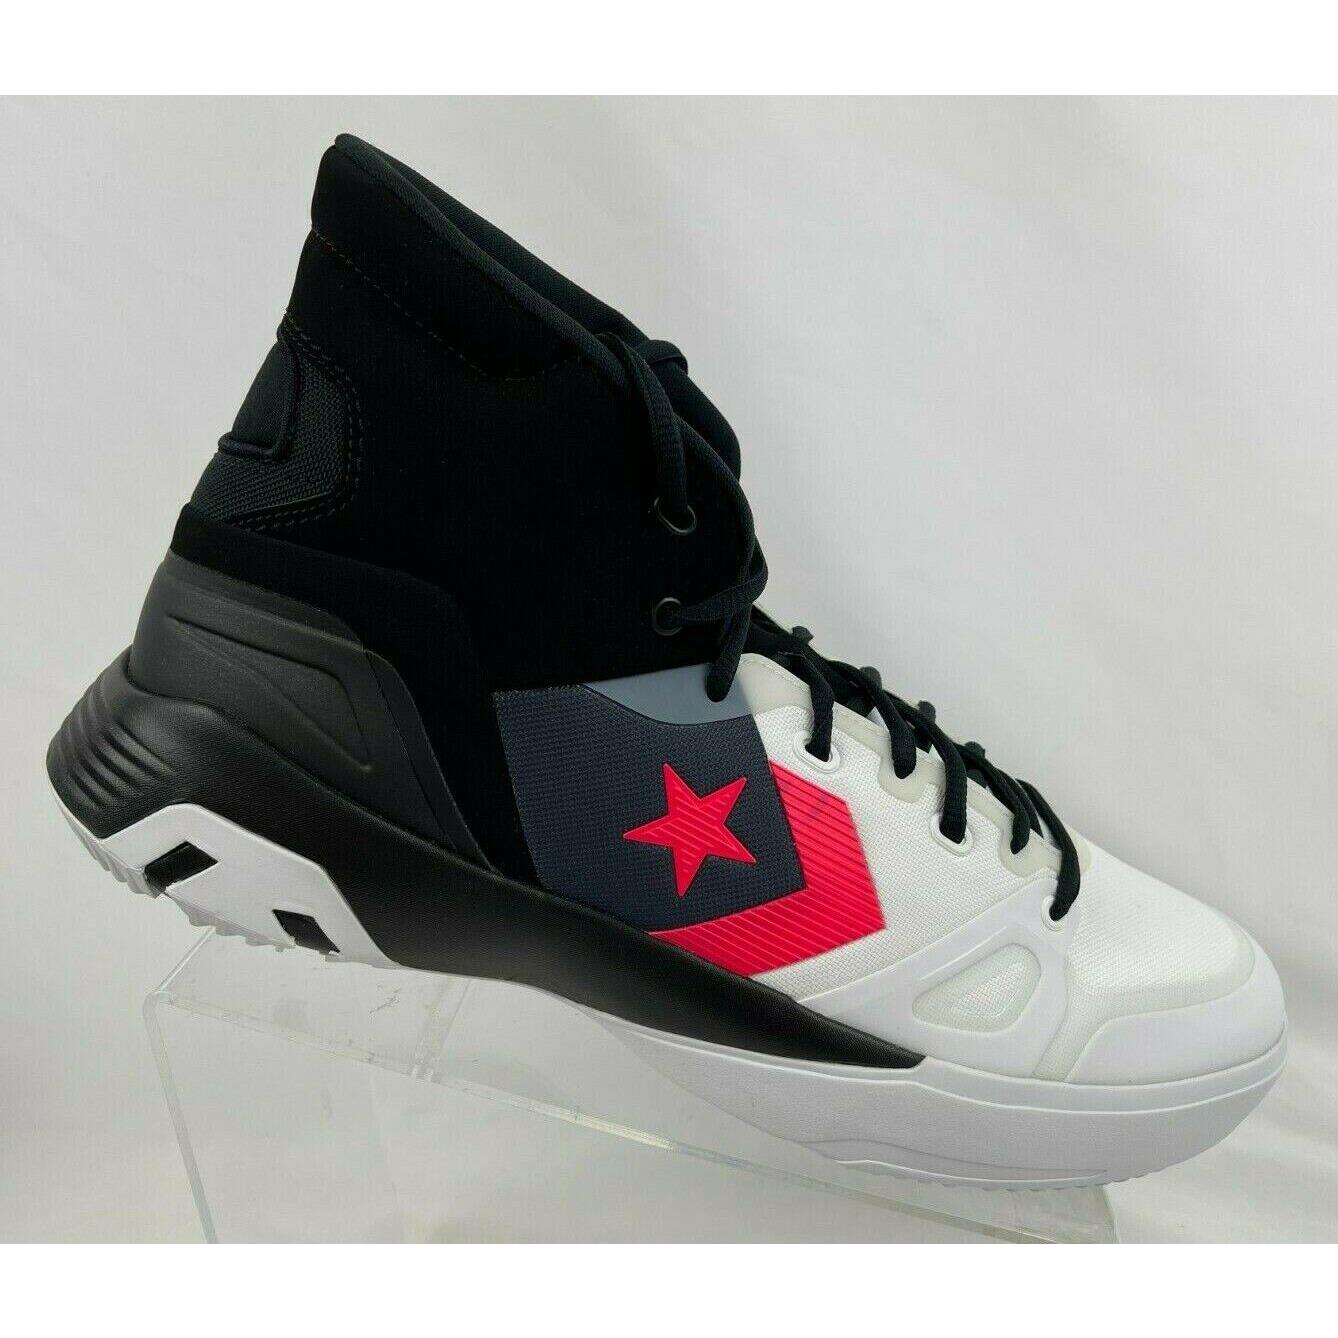 Converse G4 High Top React Basketball Boots Sneakers Shoes 166804c Mens Sz 11.5